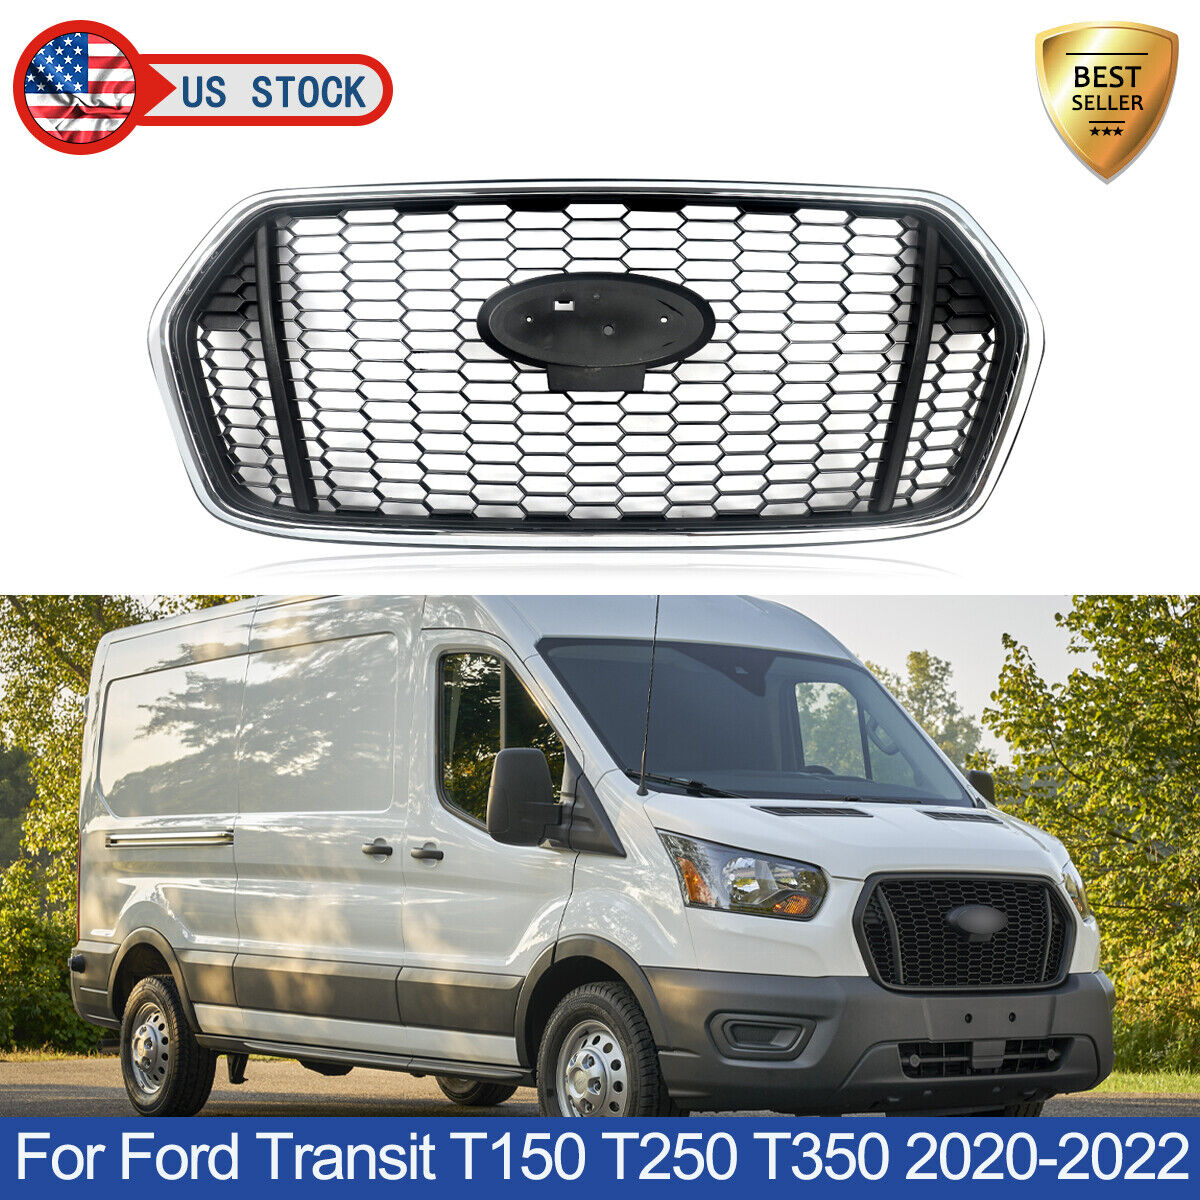 Honeycomb Upper Grille Chrome Surround For 2020-2022 Ford Transit T150 T250 T350